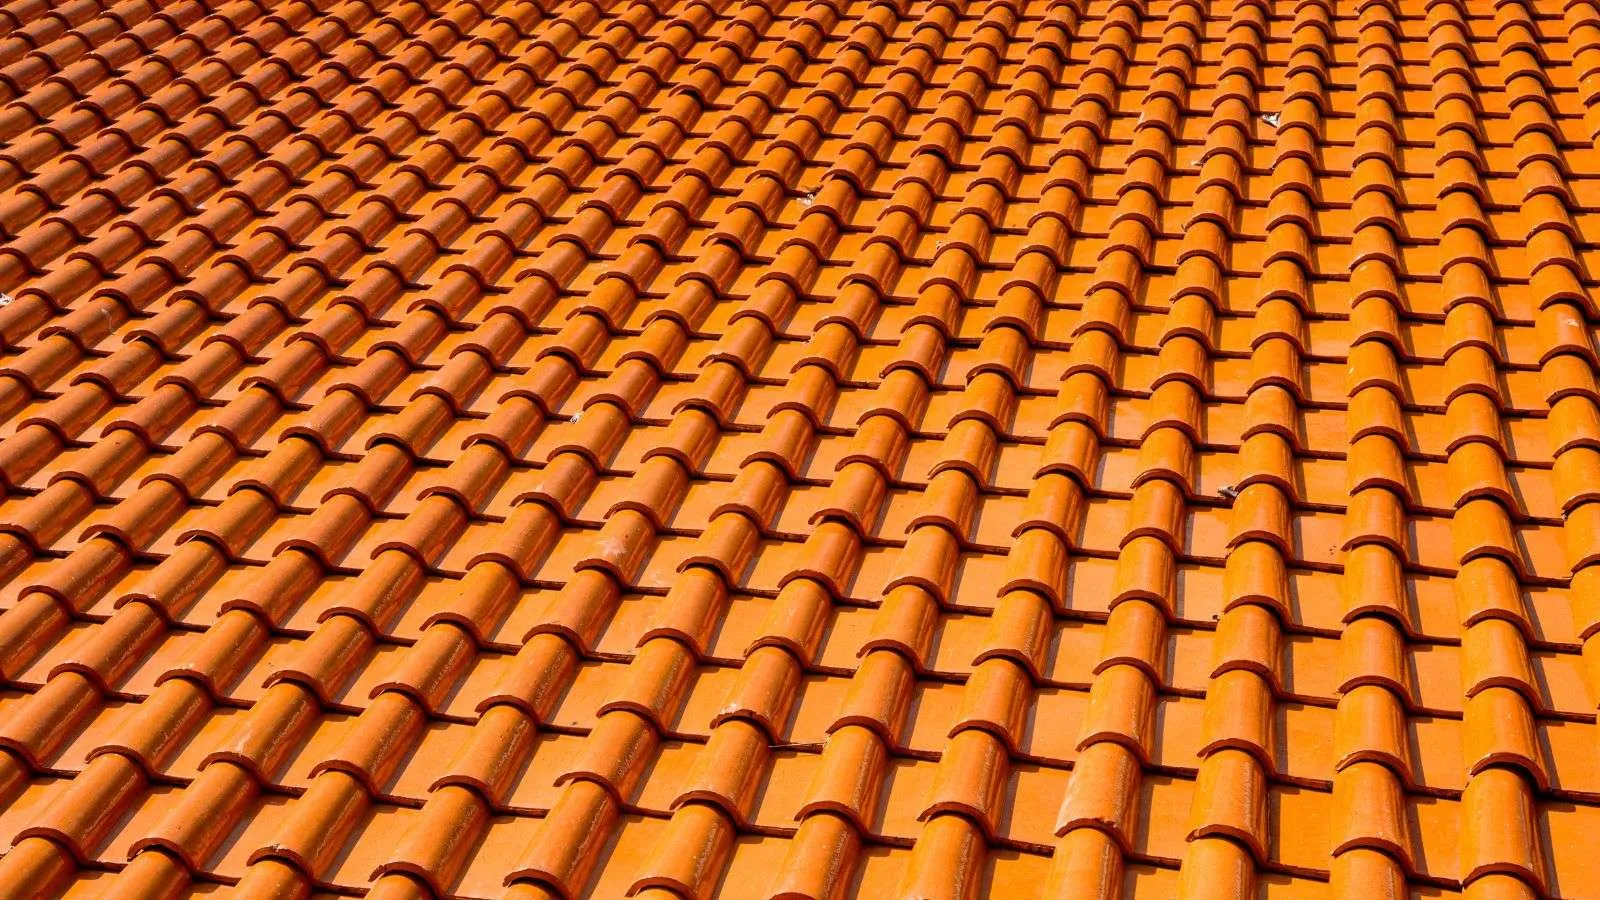 roofs with interlocking roof tiles better - bighomeprojects.com